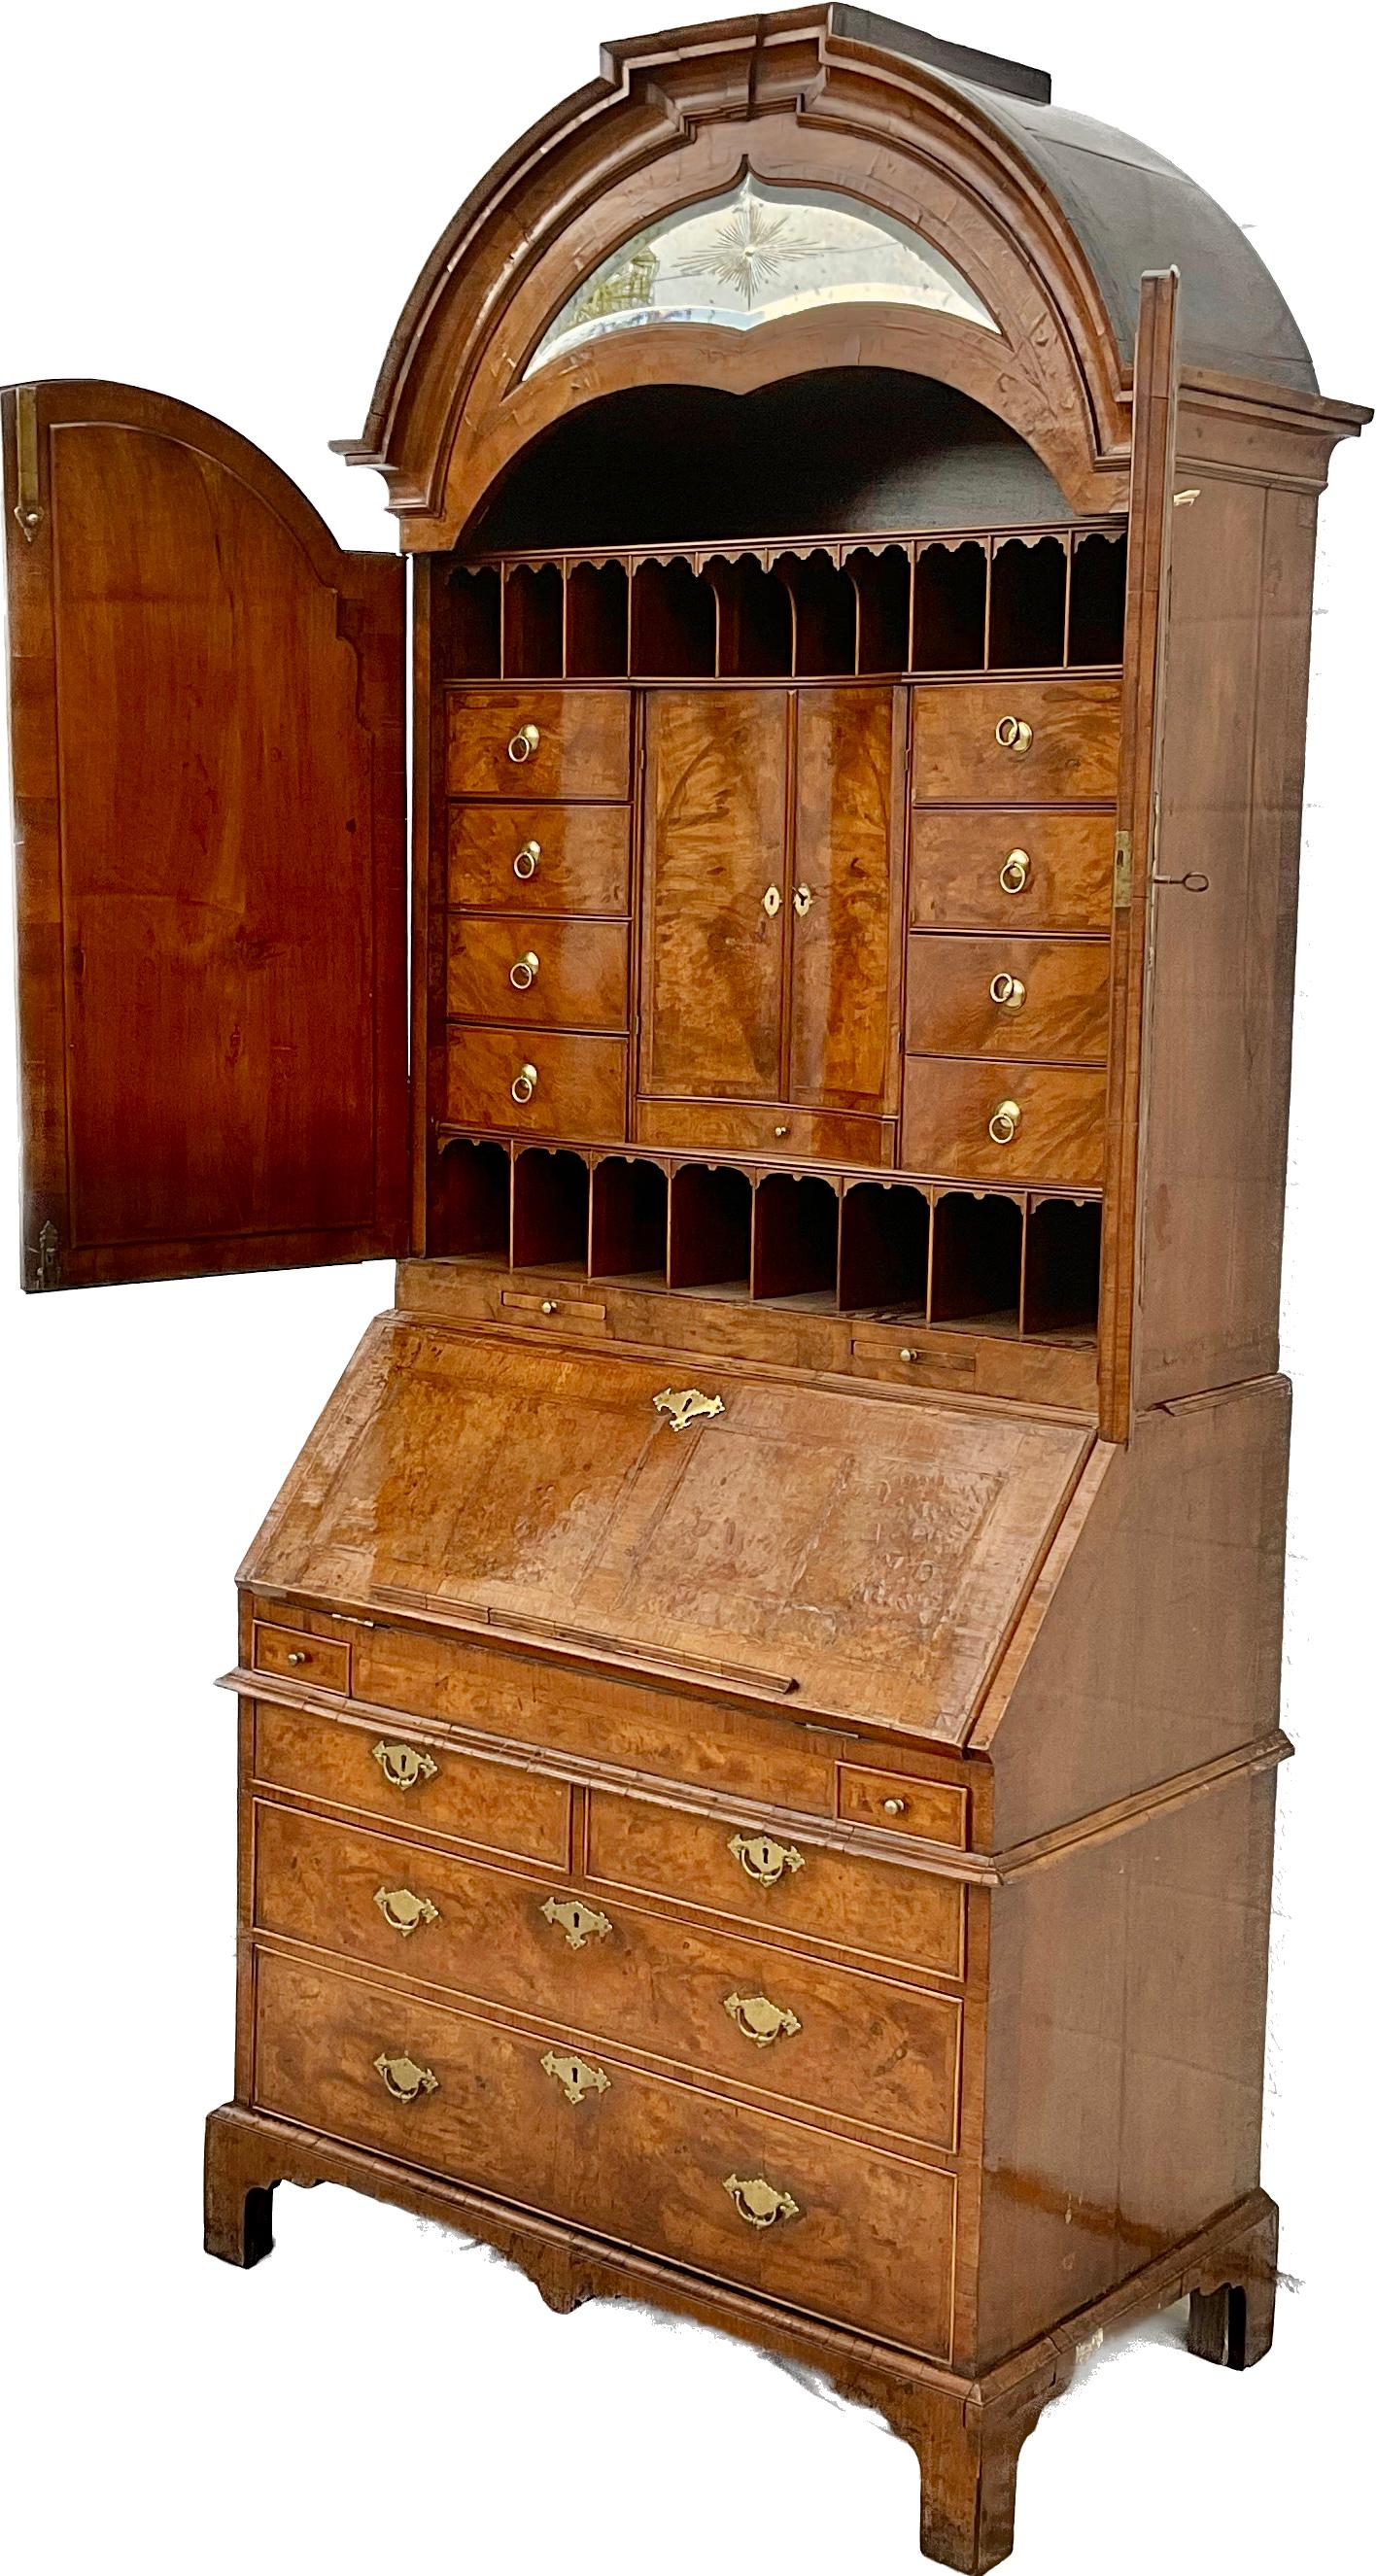 The best English Queen Anne / George I burl walnut secretary bureau bookcase in two sections. The upper arched top portion with a molded and domed cornice inset with mirrored glass and etched with a sunburst. The two doors with original mirrored